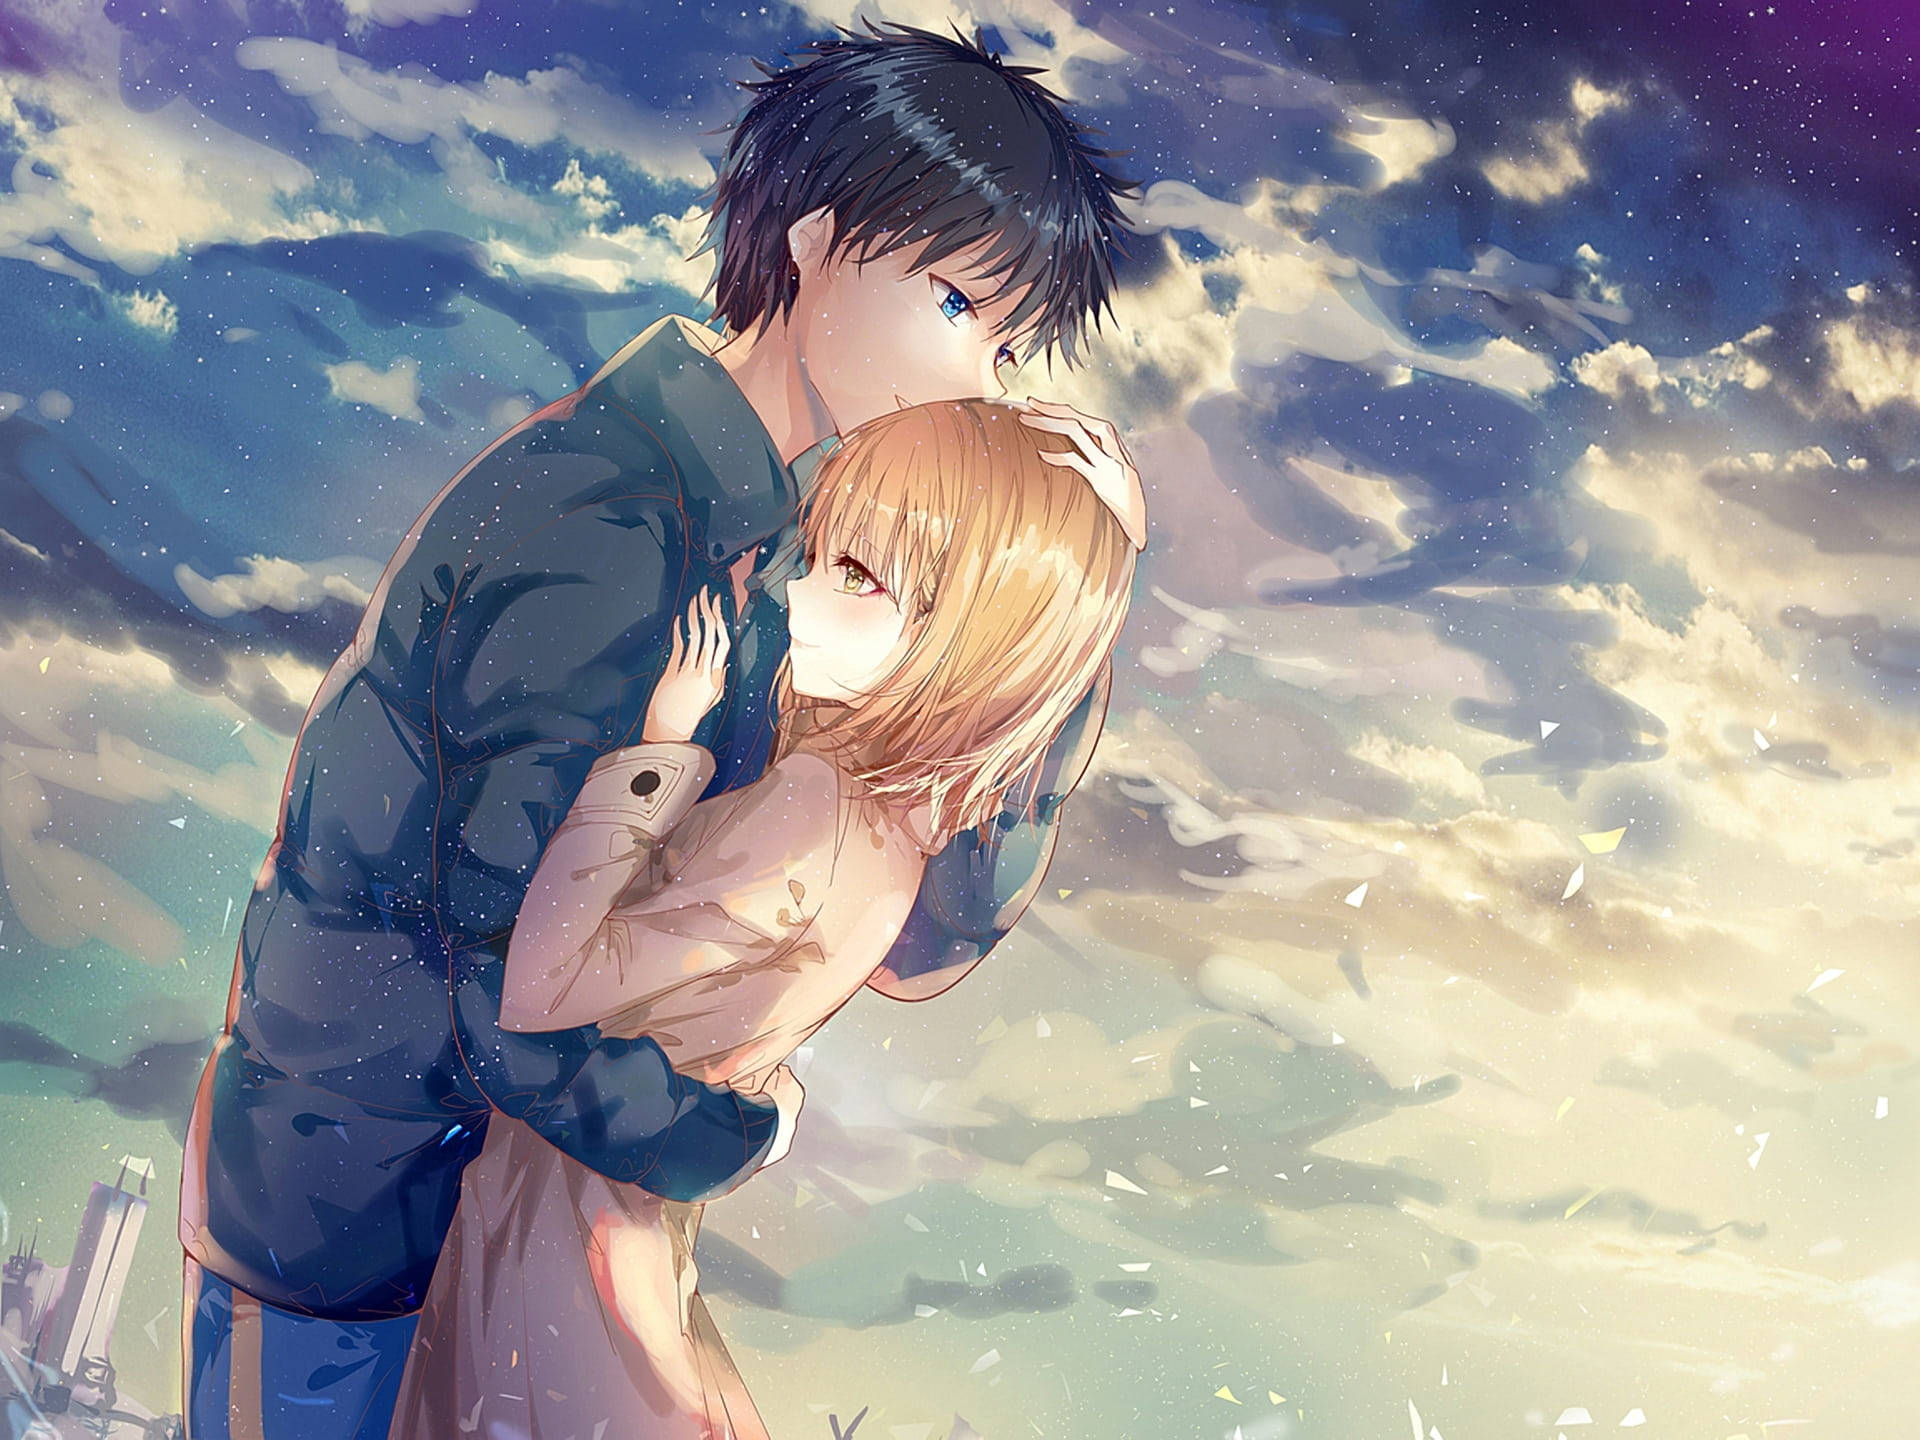 Cute Anime Couple Holding Each Other Wallpaper